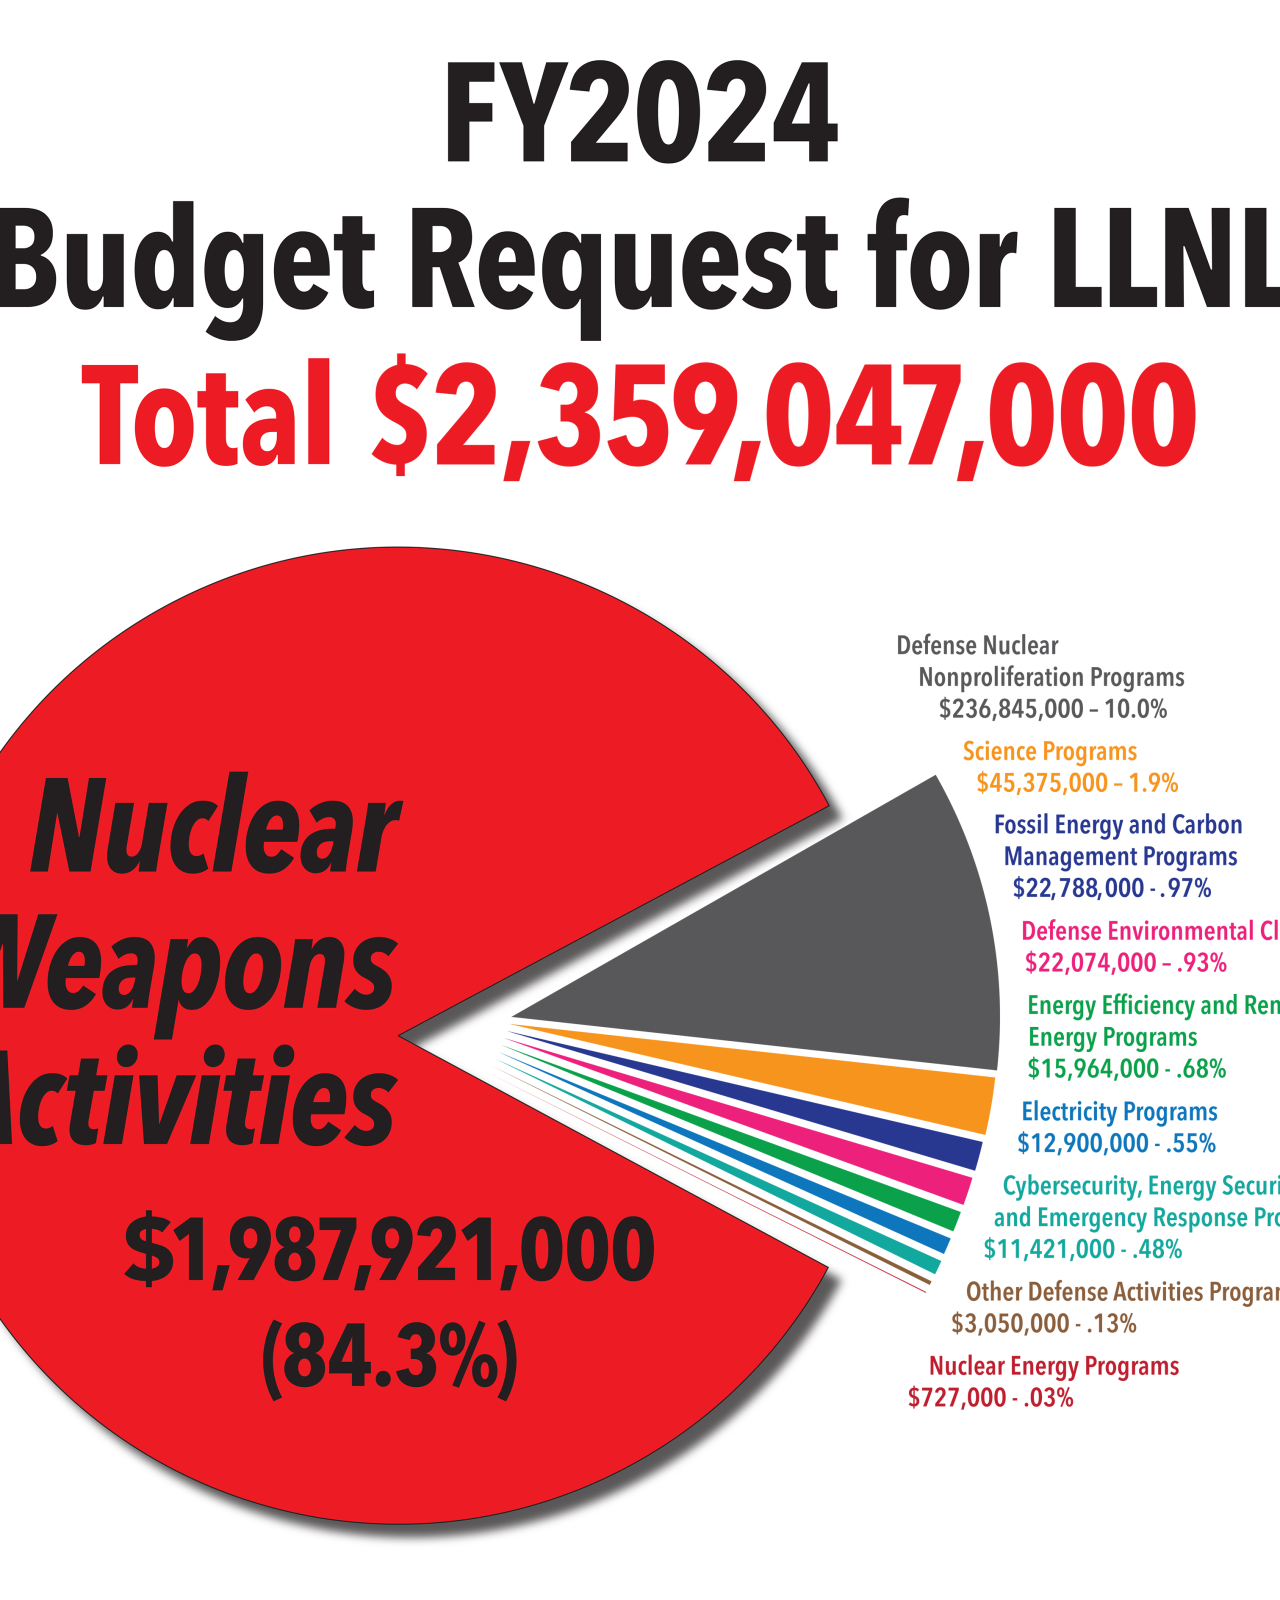 Livermore Lab Budget: Everything for Nukes, Pennies for Cleanup